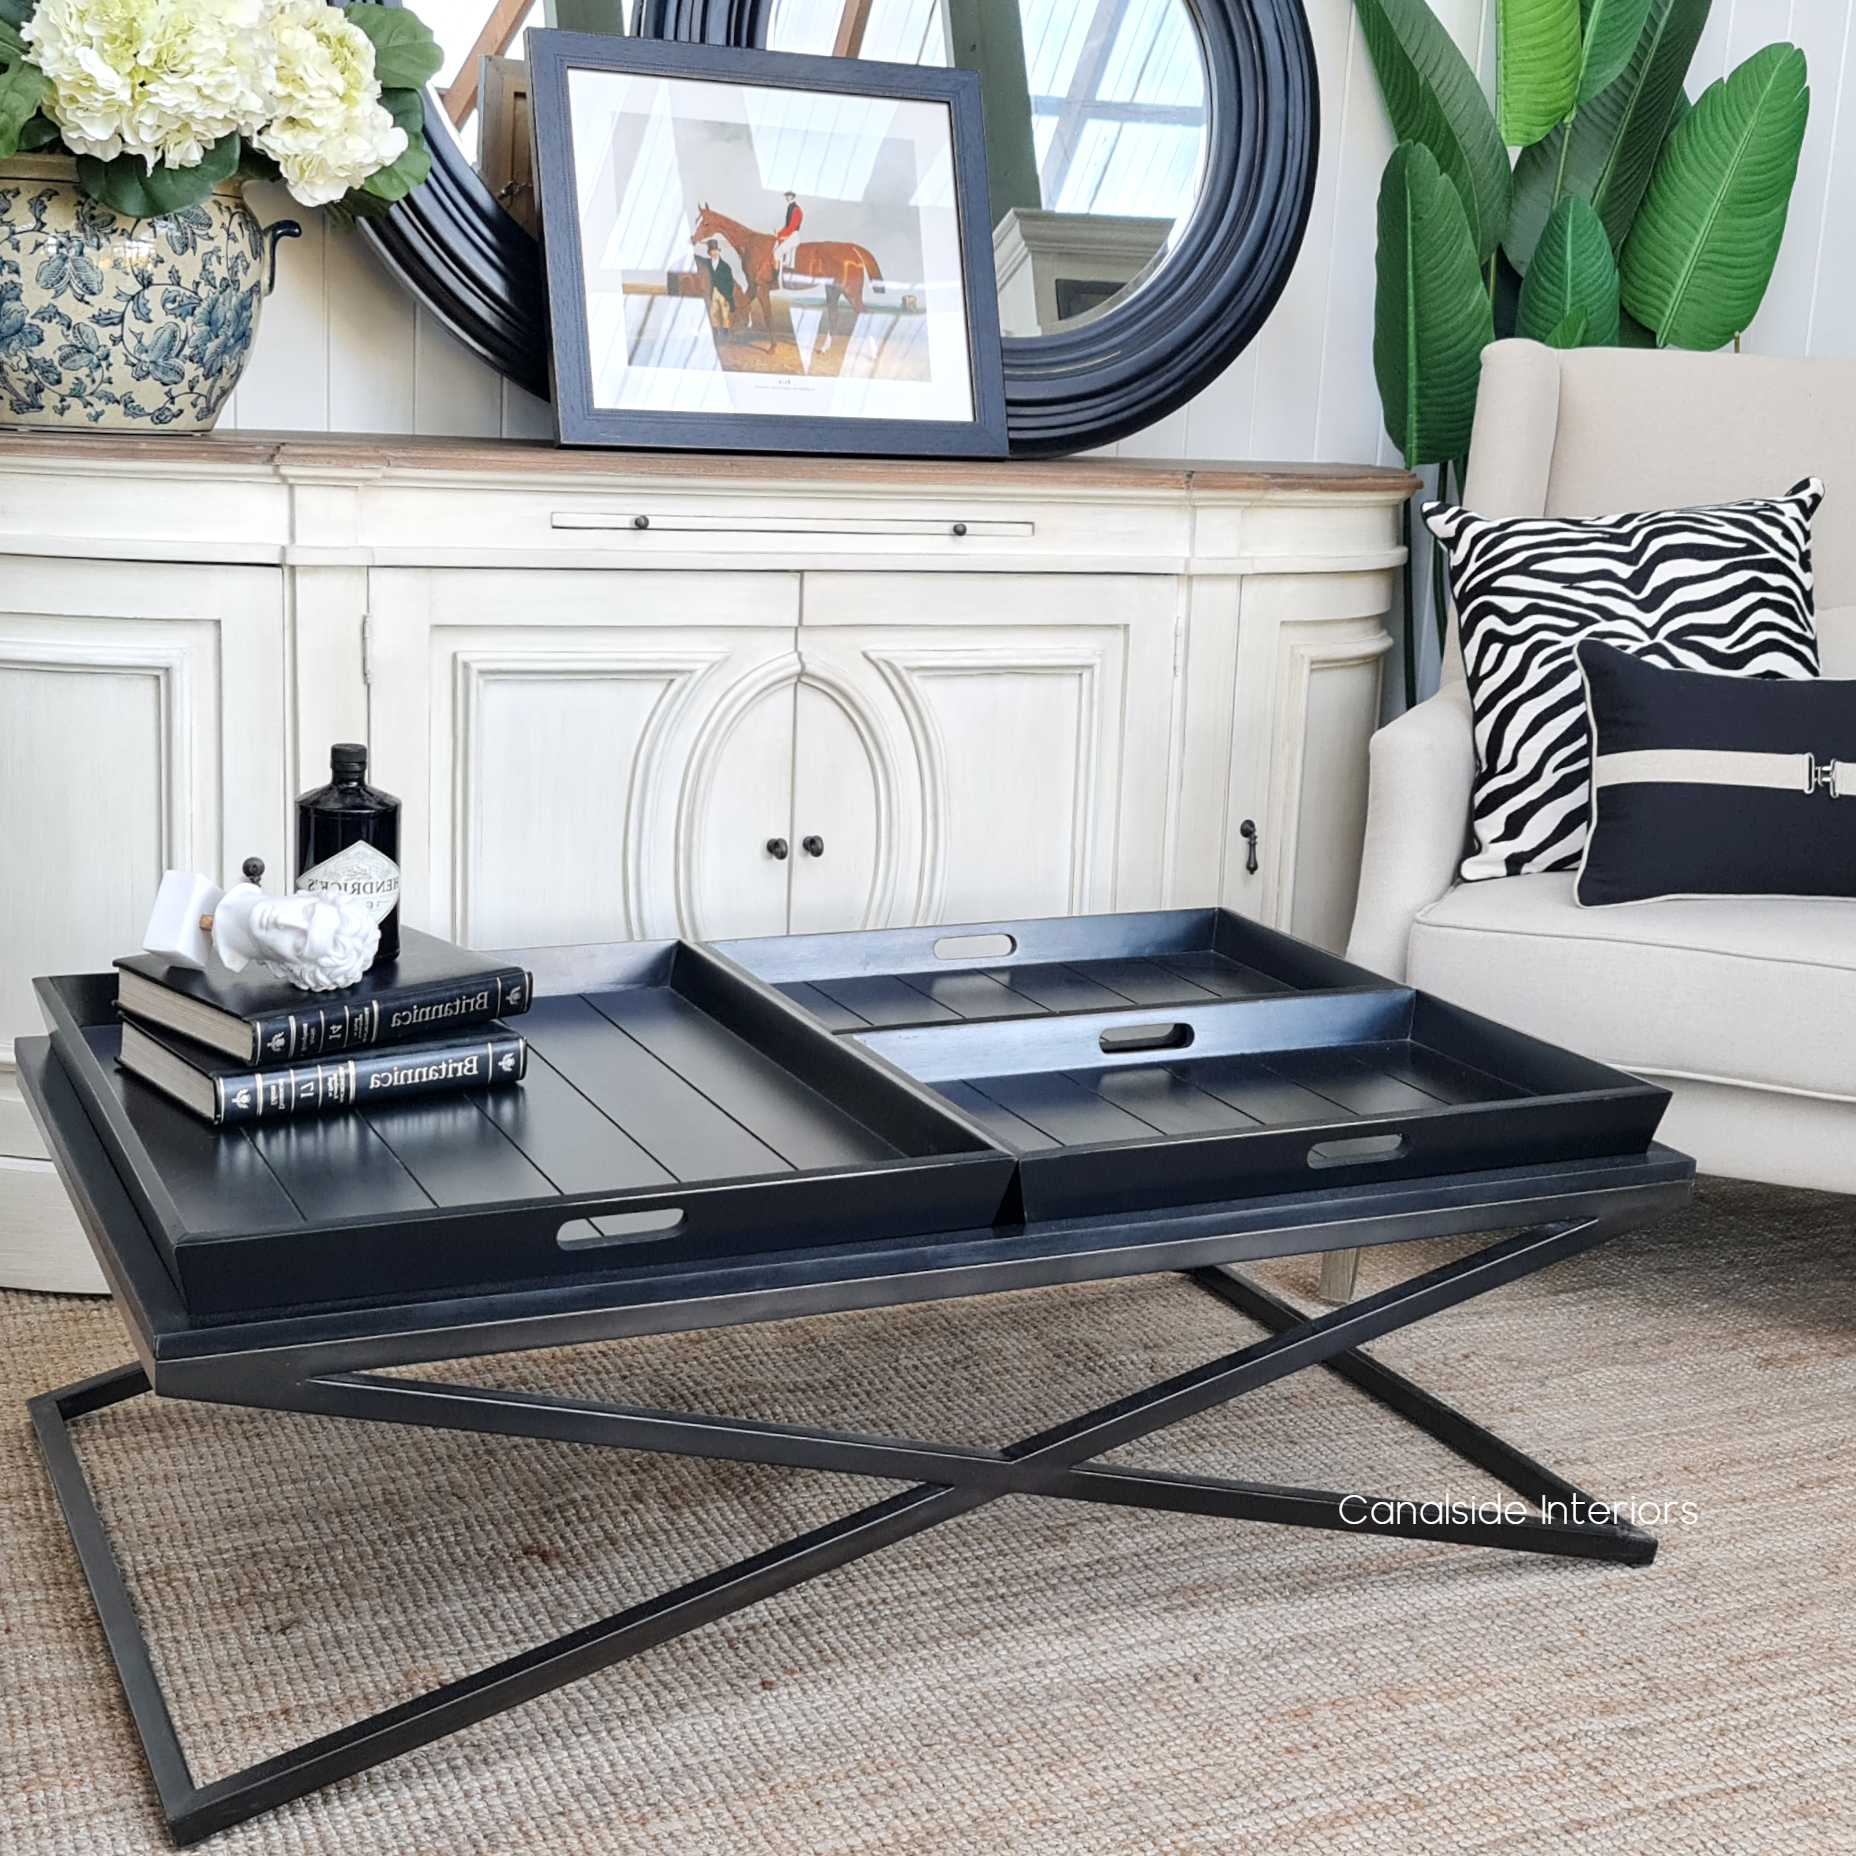 Baxter Rectangular Coffee Table with 3 Removable Butler Trays Distressed Black Charcoal, Coffee Tables, Hamptons, Living Room, Lounge Room, Family Room, Criss Cross, Cross Leg, Livingroom, Loungeroom, Family room, familyroom